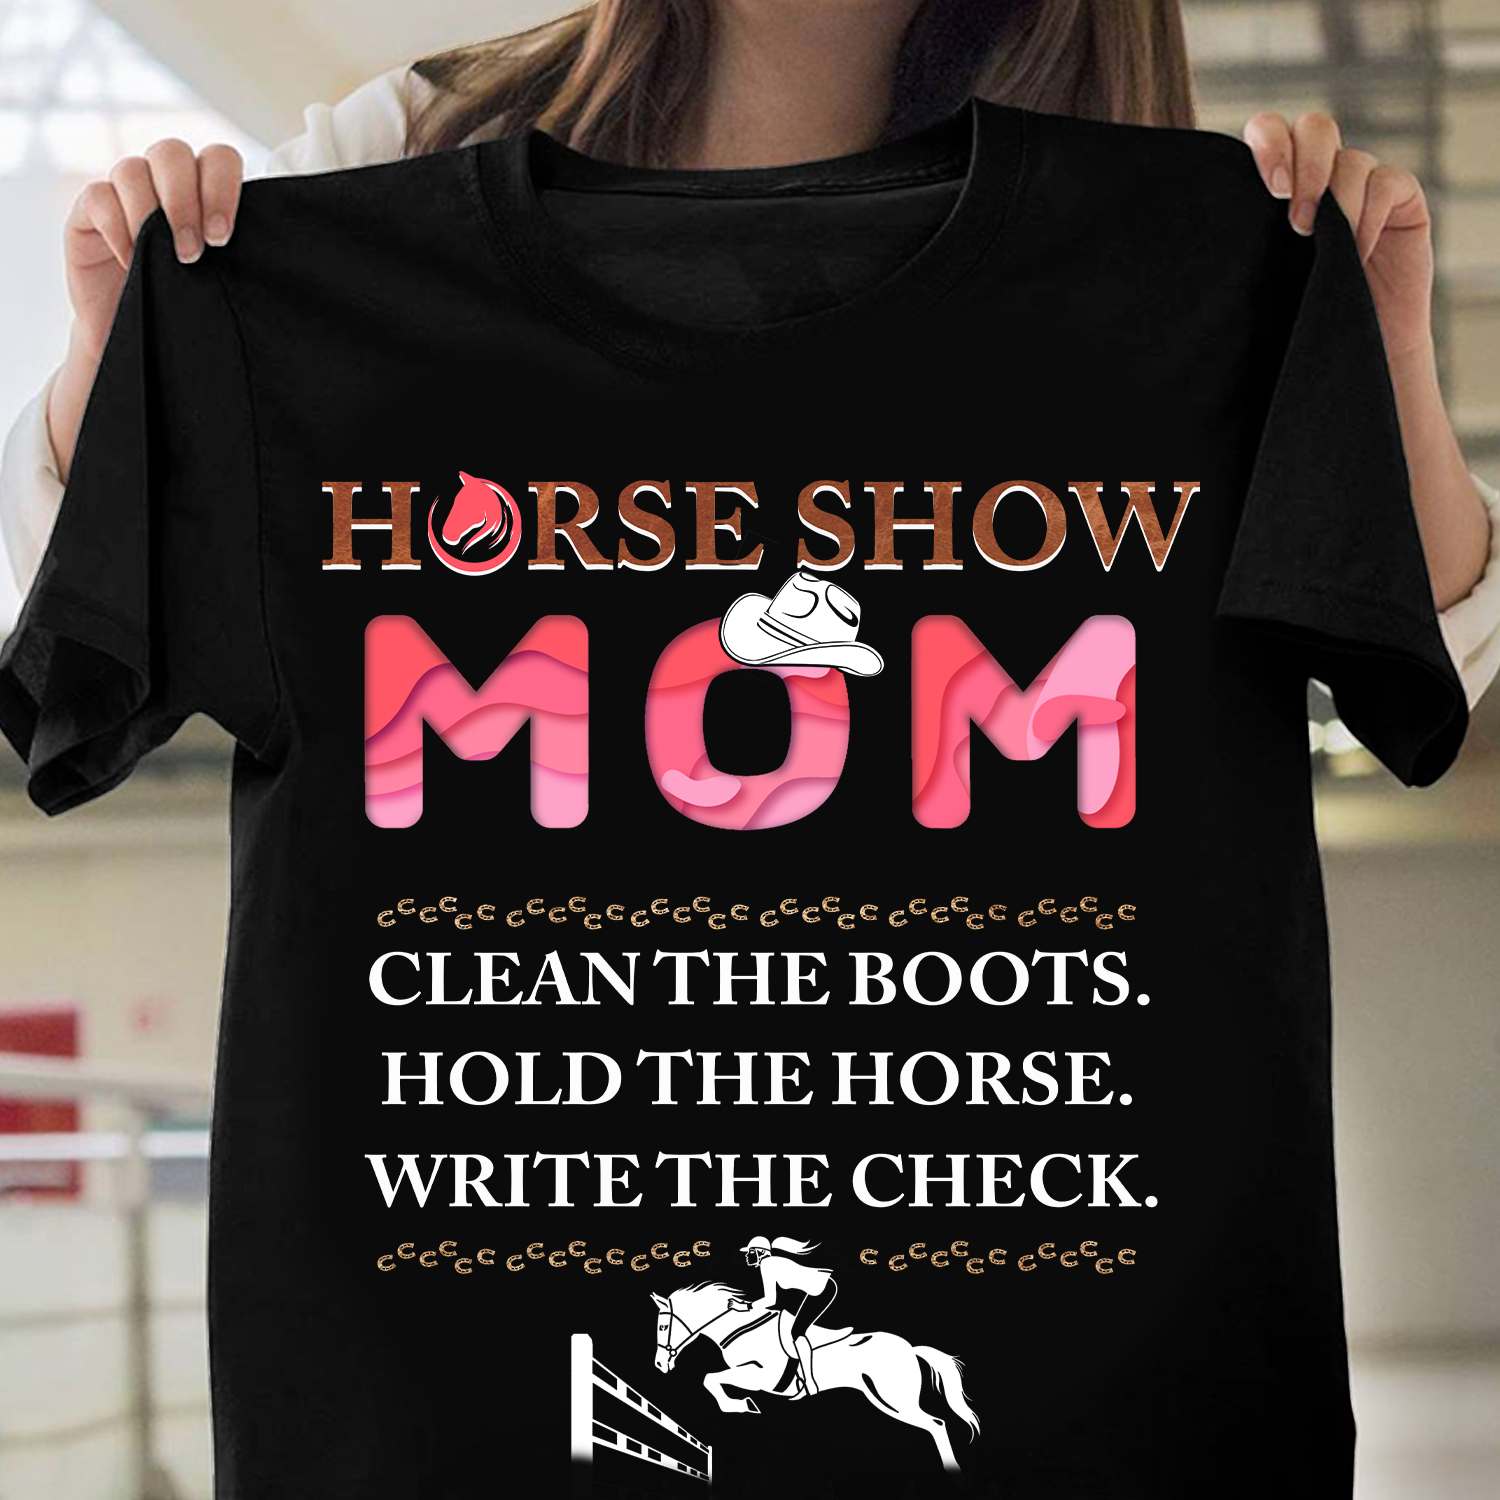 Horse show mom - Clean the boots, hold the horse, write the check